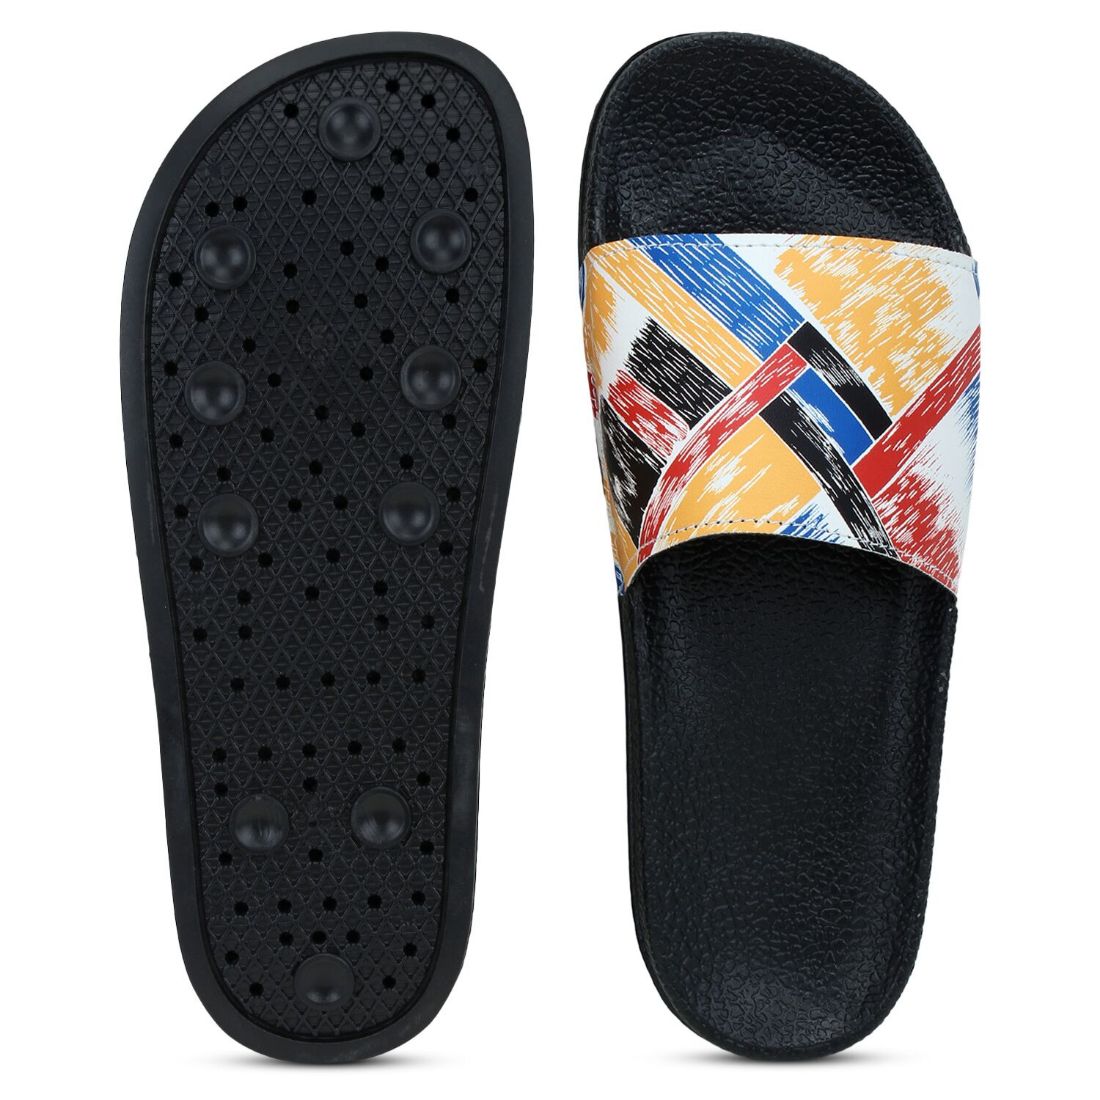  Women Multicolor Color Synthetic Material  Casual Sliders